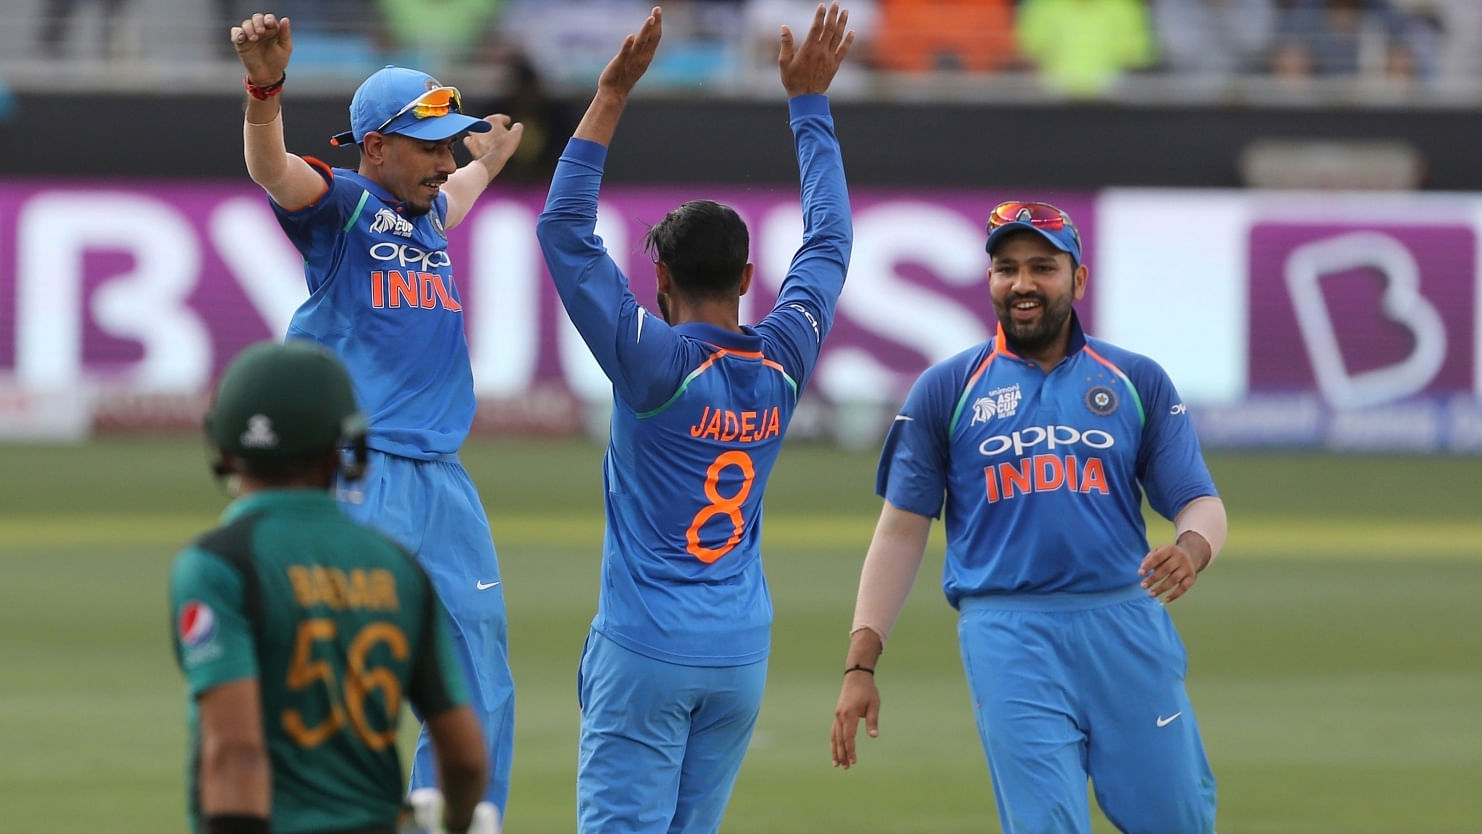 India beat Pakistan by 9 wickets in the Asia Cup match on Sunday.